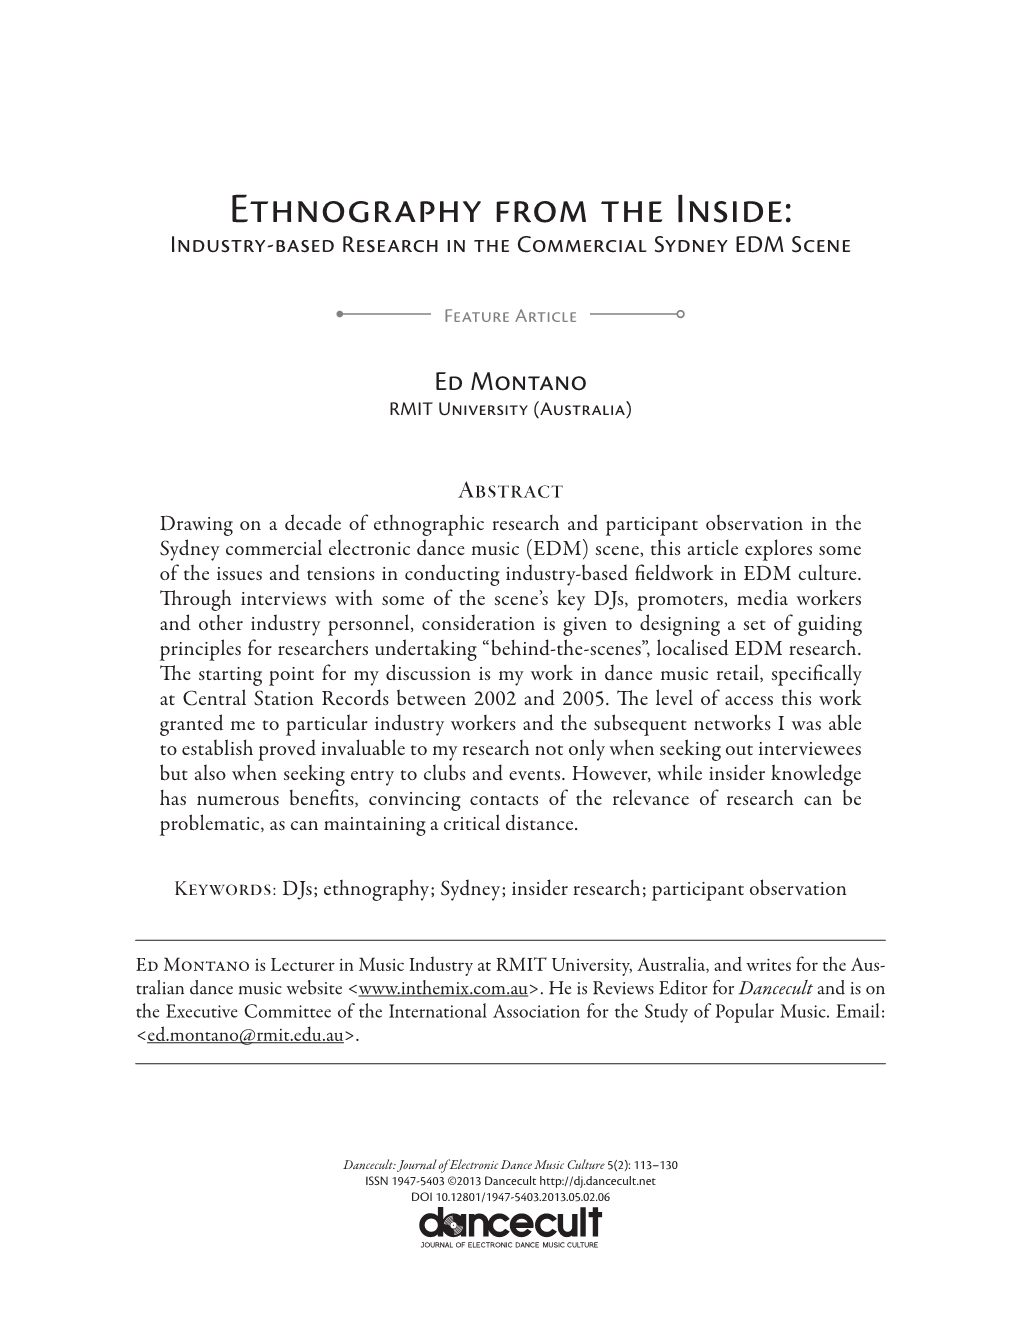 Ethnography from the Inside: Industry-Based Research in the Commercial Sydney EDM Scene